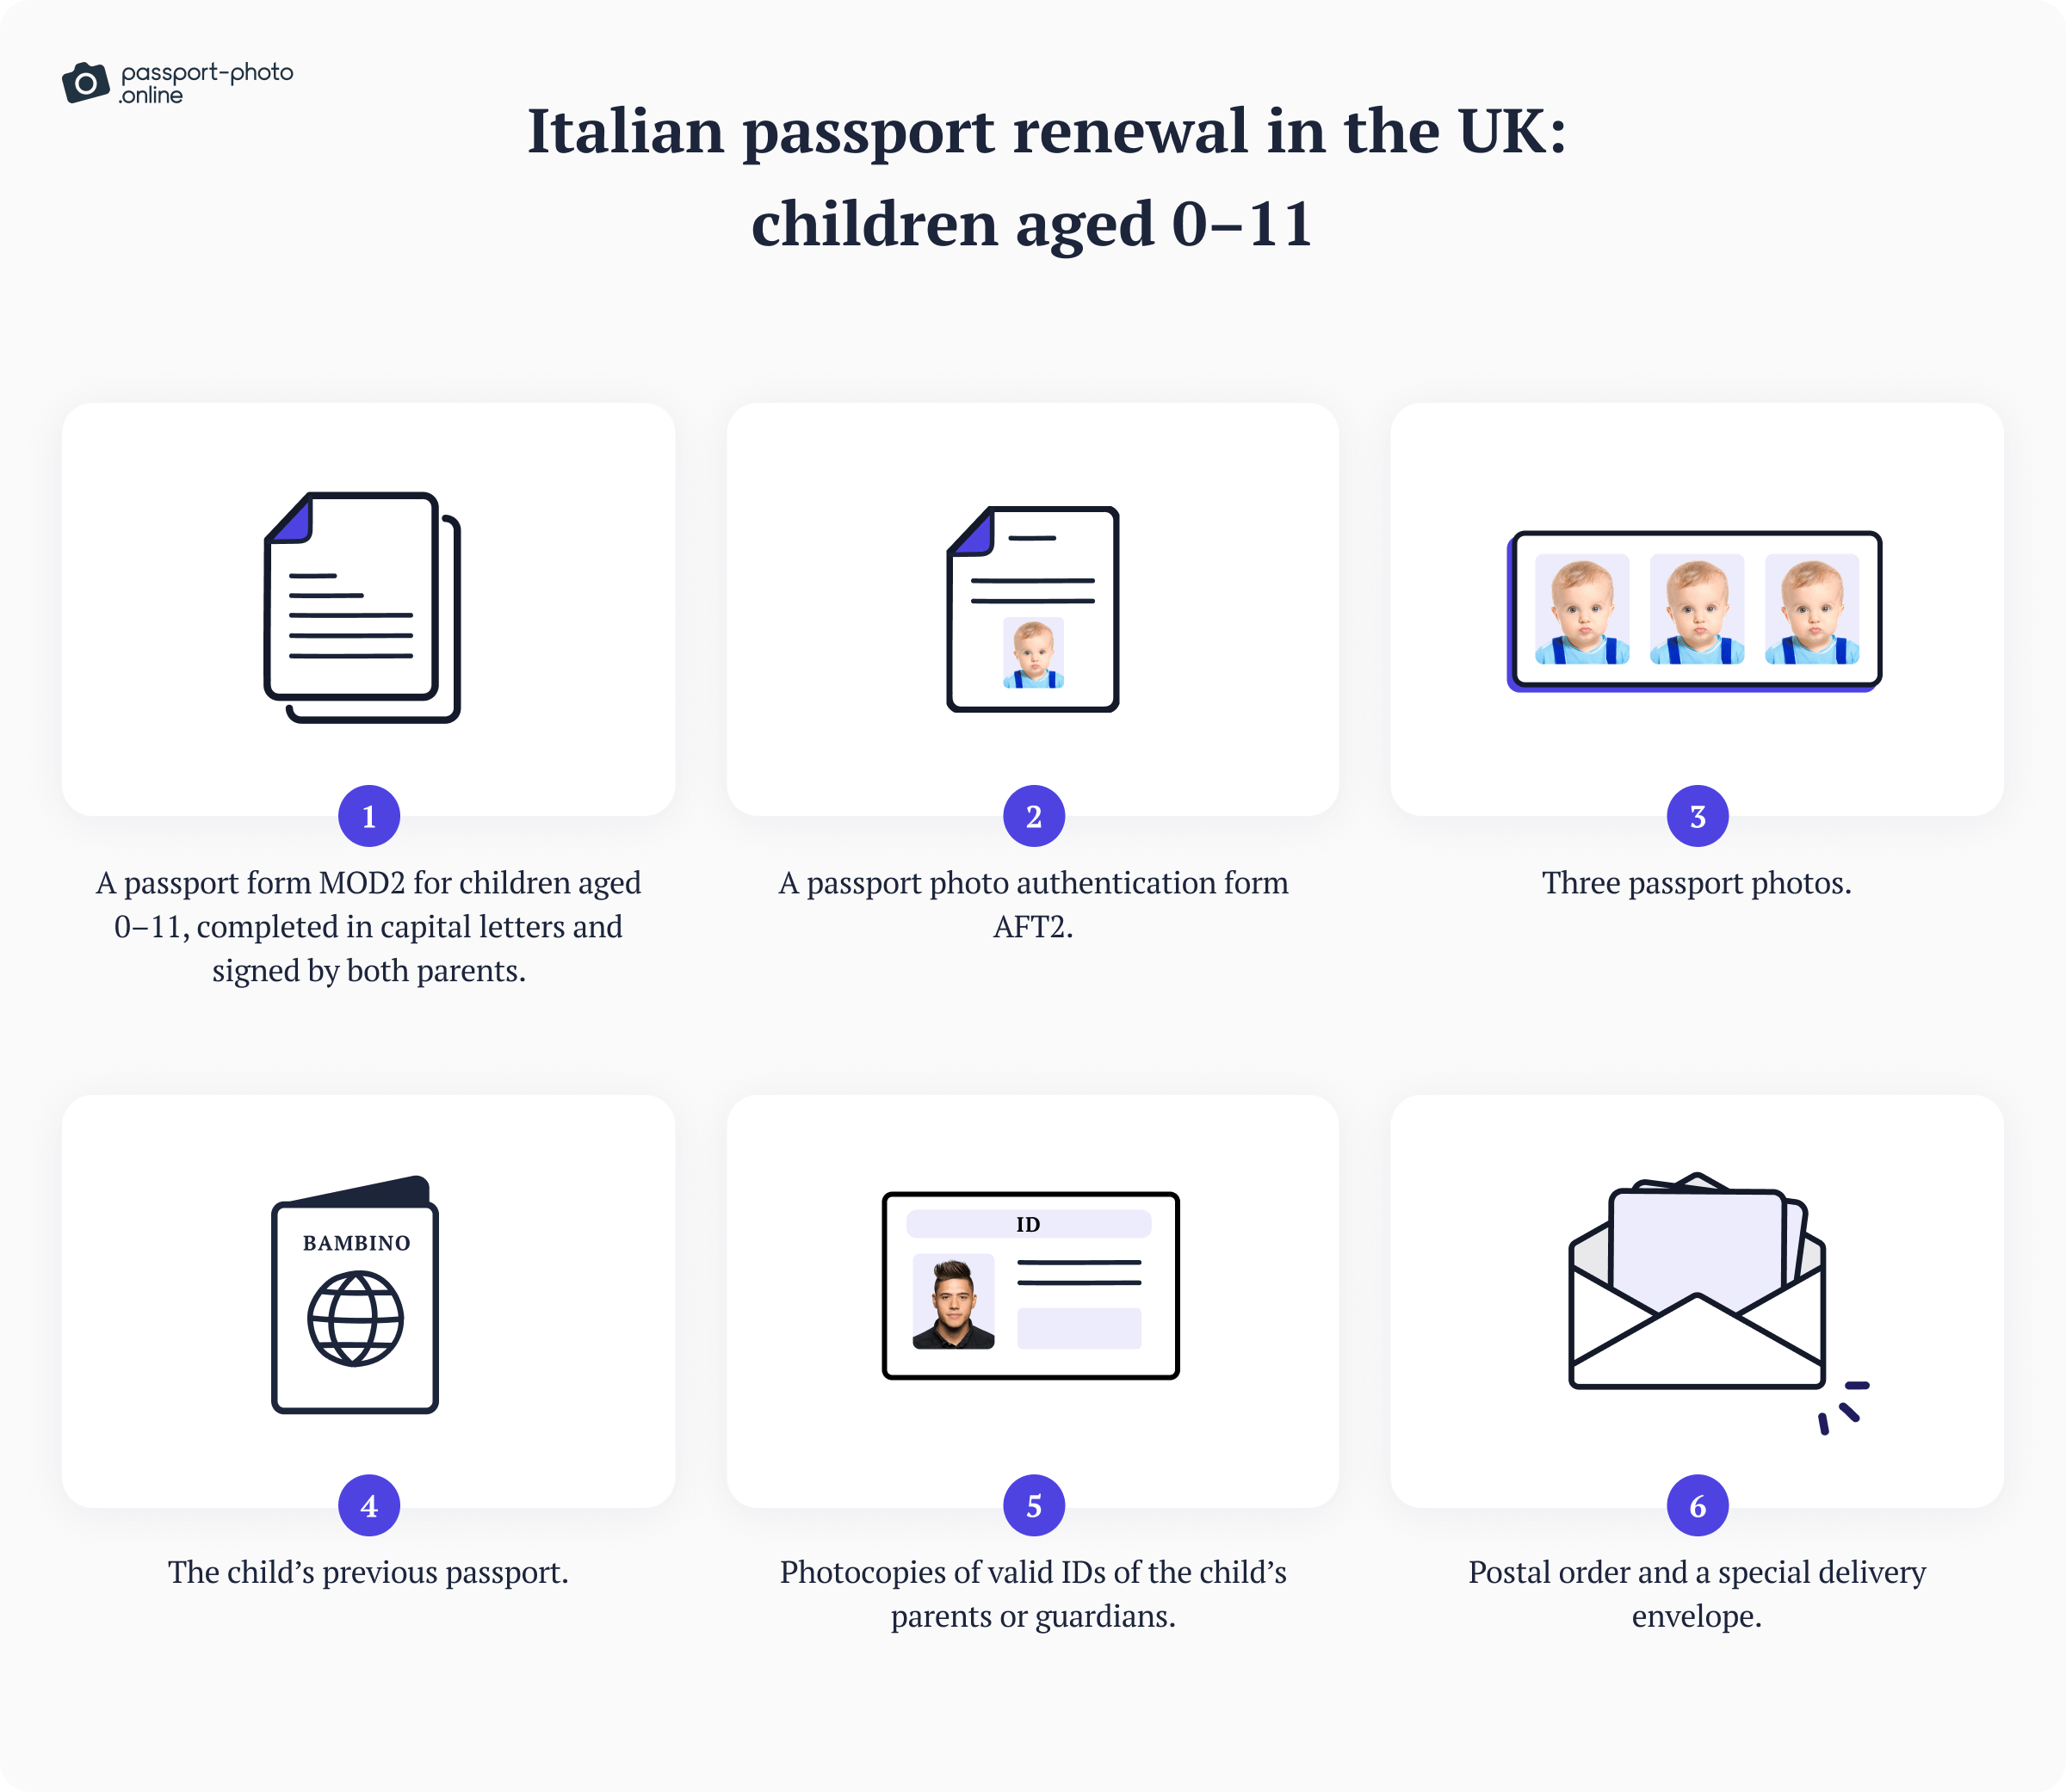 Documents required to renew the Italian passports of children younger than 11 years old.